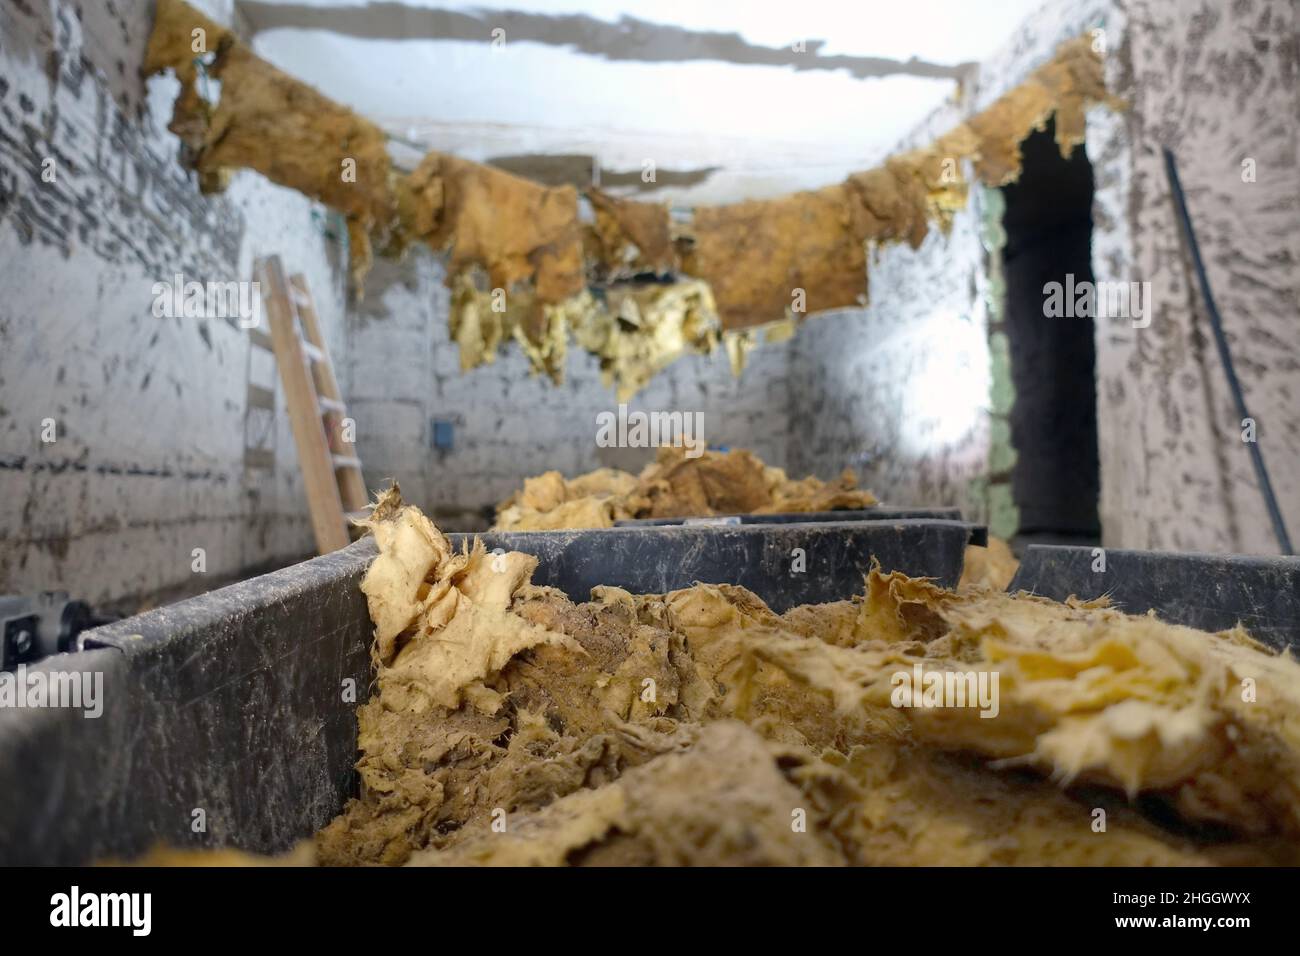 Insulation material that is dried before disposal when renovating after a flood disaster in order to reduce weight, Germany, North Rhine-Westphalia Stock Photo